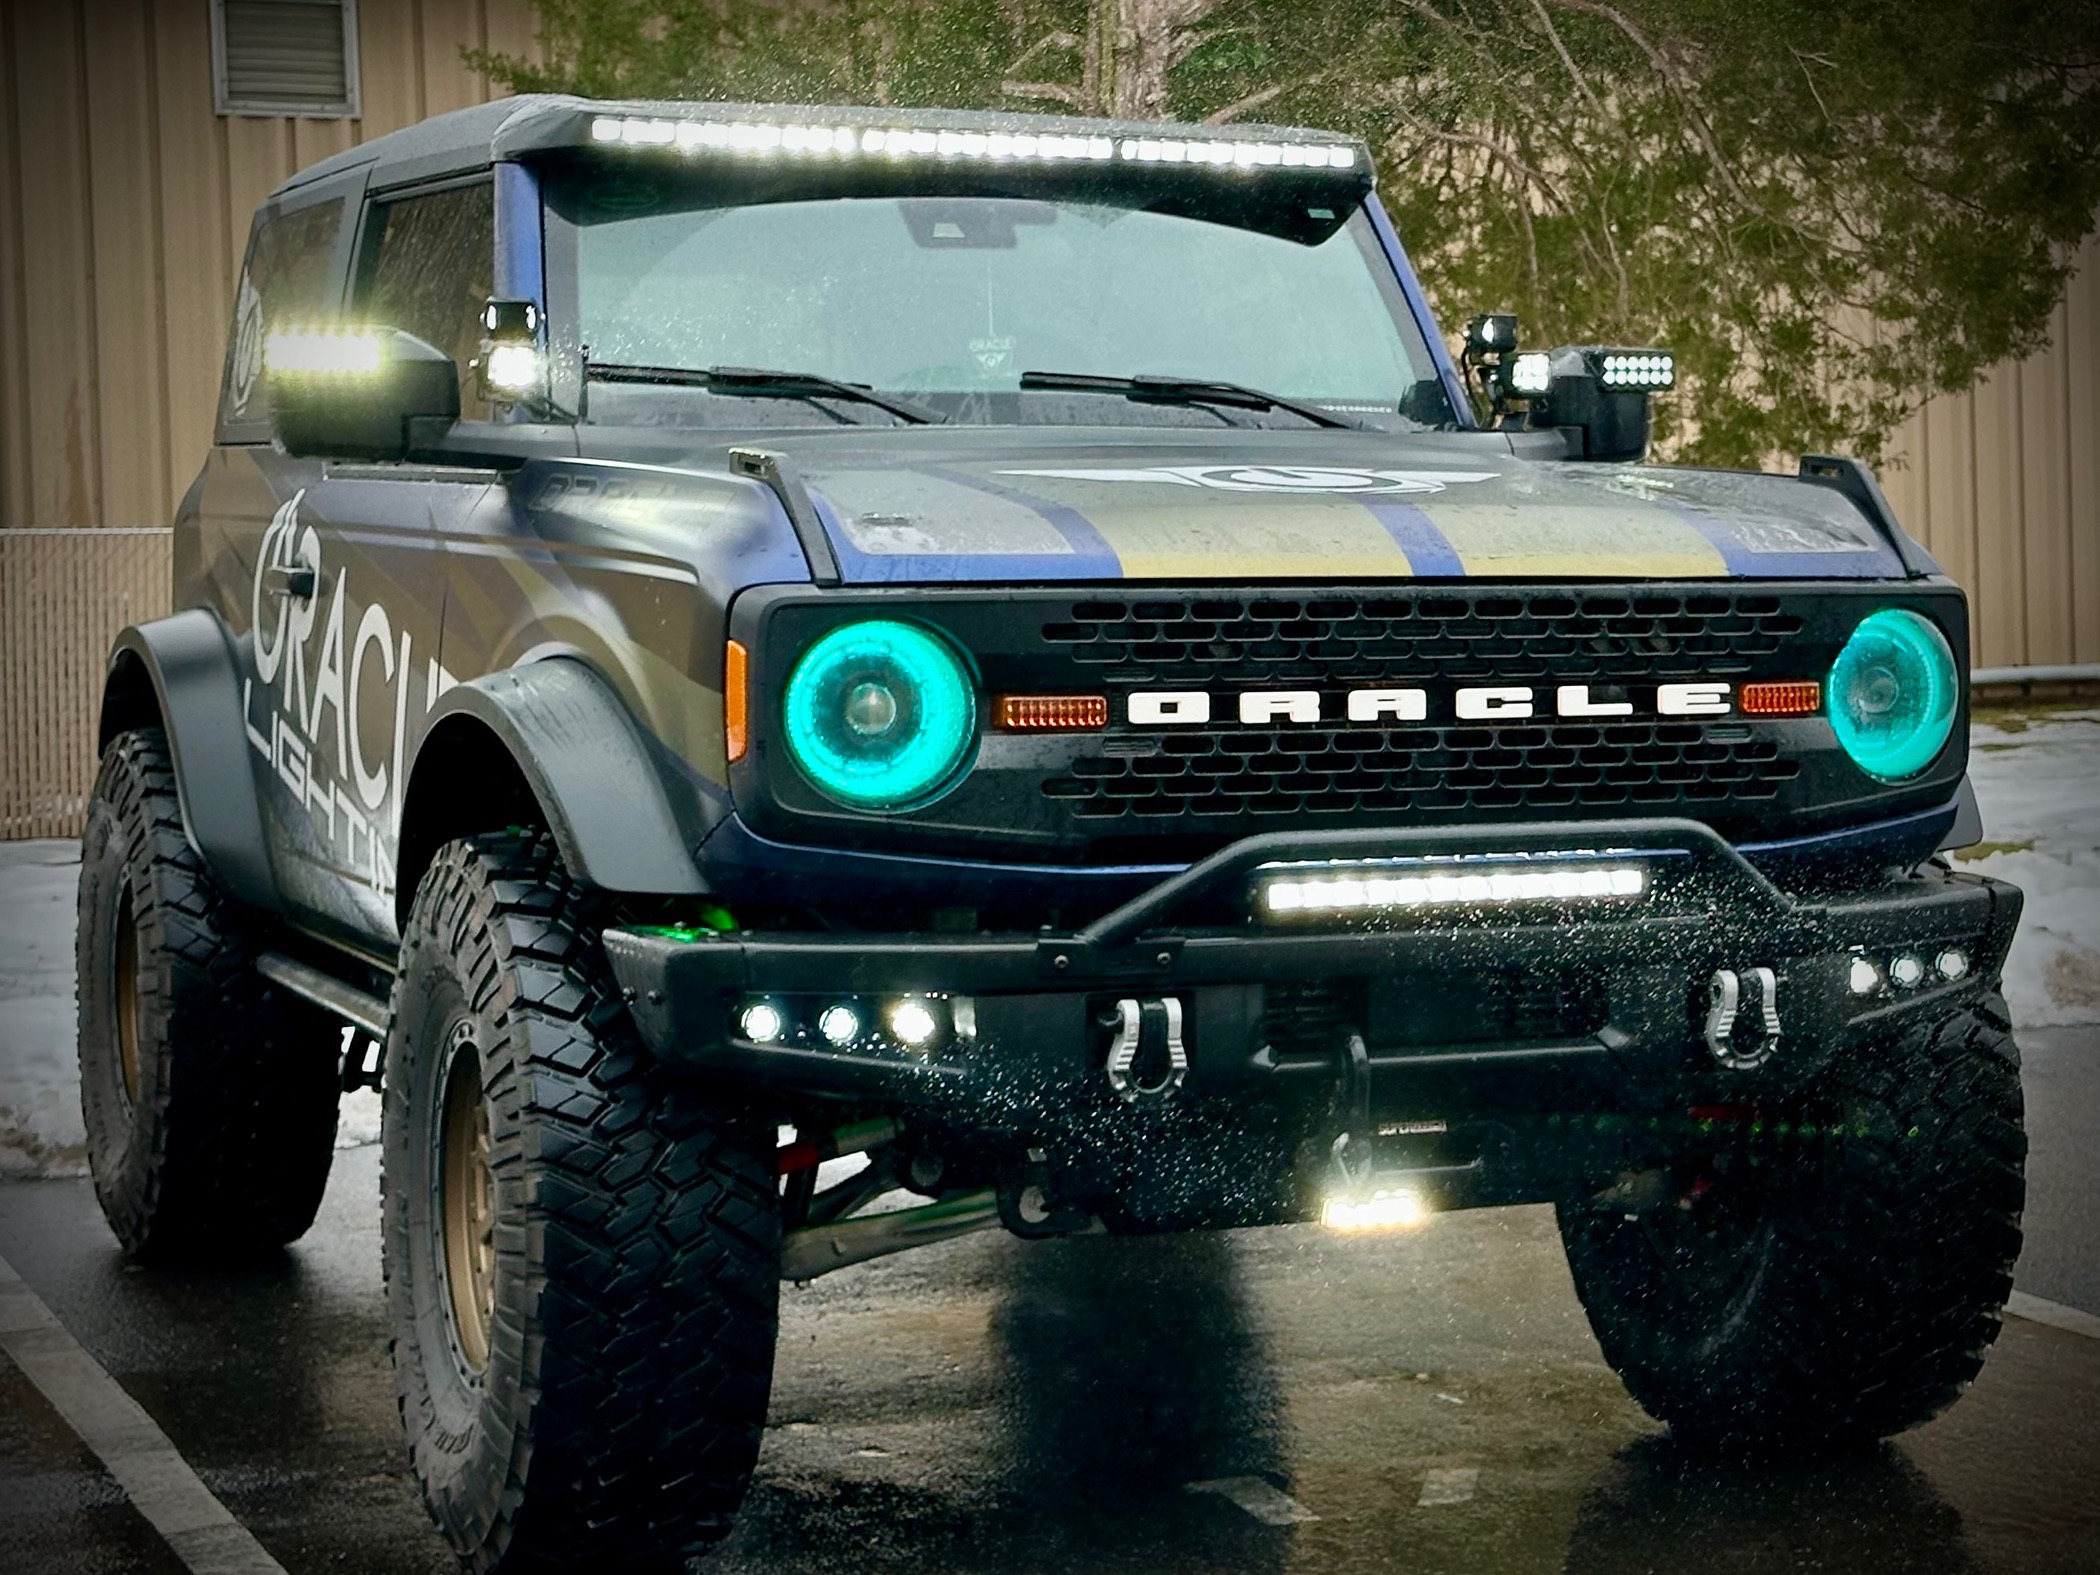 Ford Bronco NEW VIDEO! The Latest Video on the New Vega Series Auxiliary Lights IMG_2189